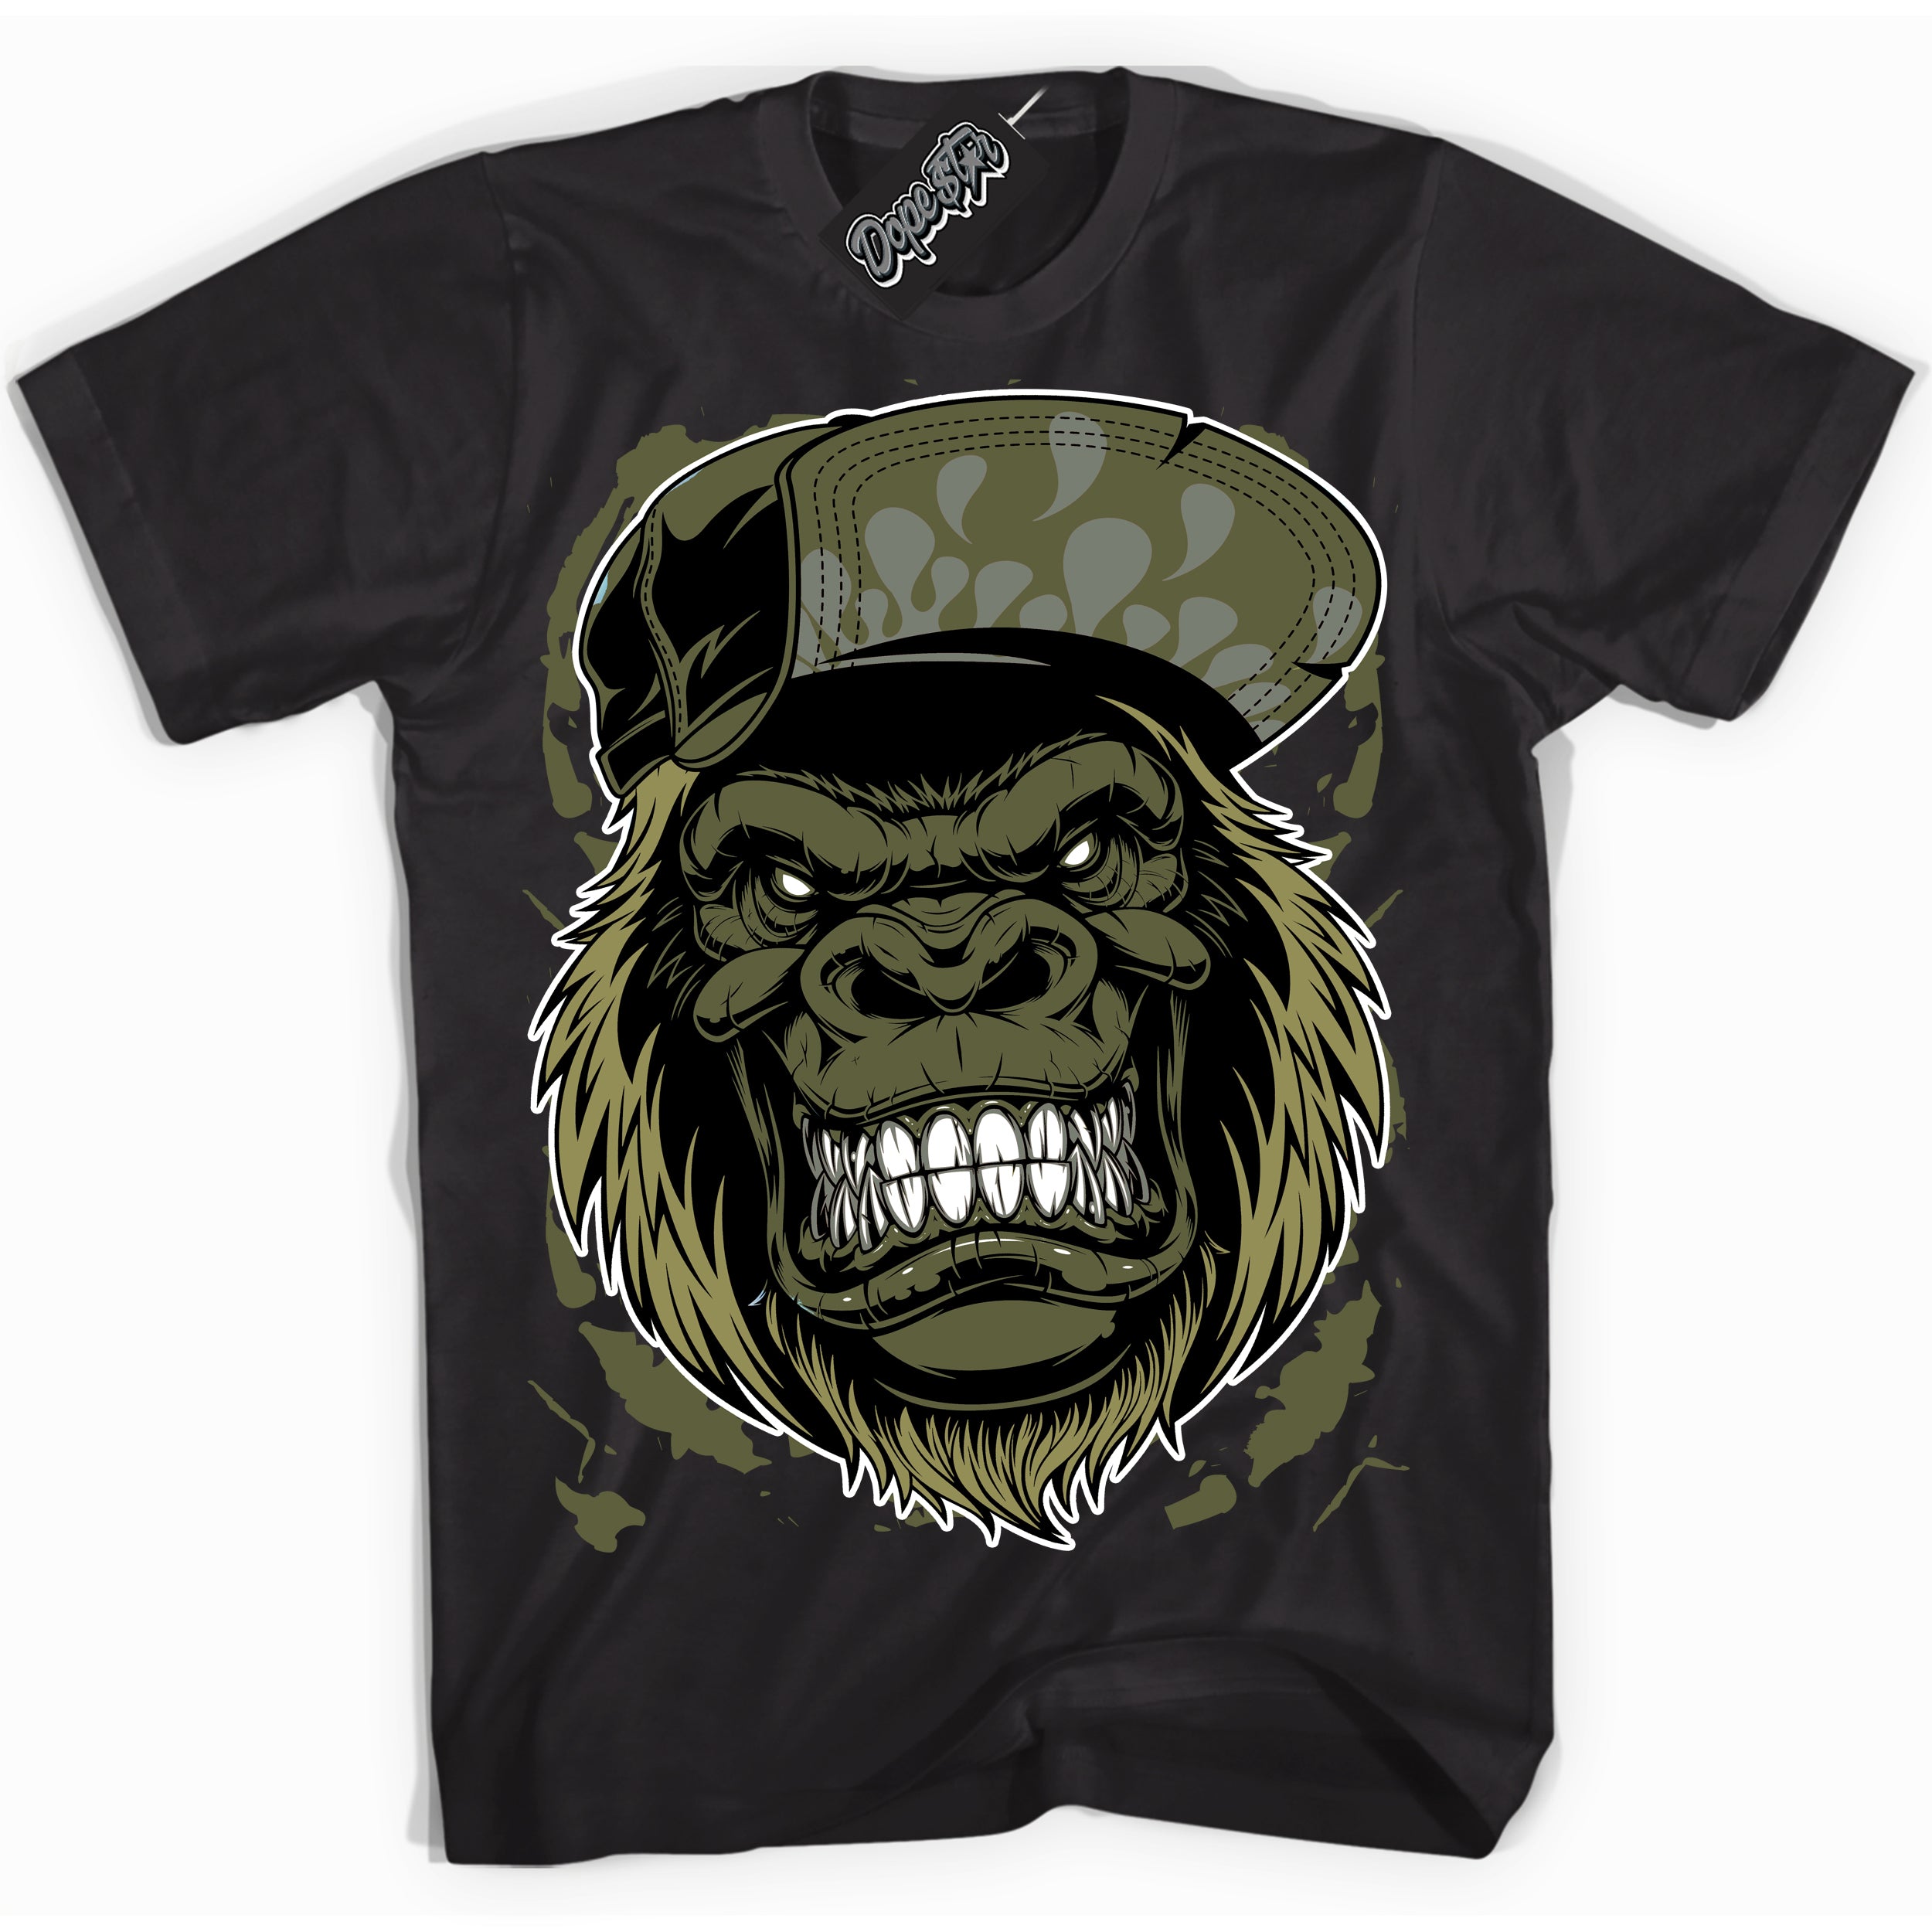 Cool Black graphic tee with “ Gorilla Beast ” print, that perfectly matches Craft Olive 4s sneakers